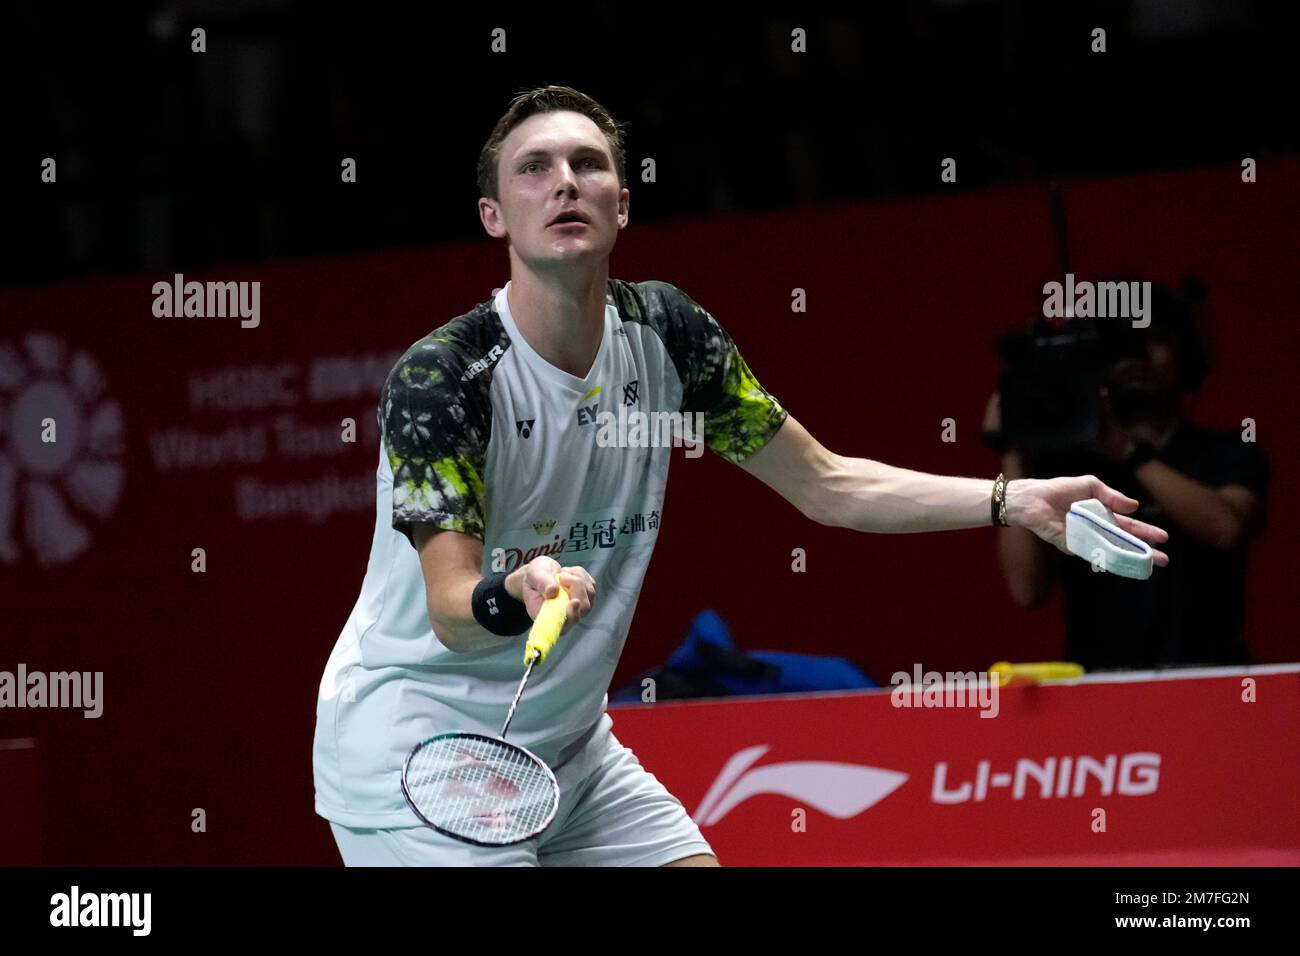 Denmarks Viktor Axelsen reacts after winning the mens singles final badminton match against Indonesias Anthony Sinisuka Ginting at the BWF World Tour Finals in Bangkok, Thailand, Sunday, Dec